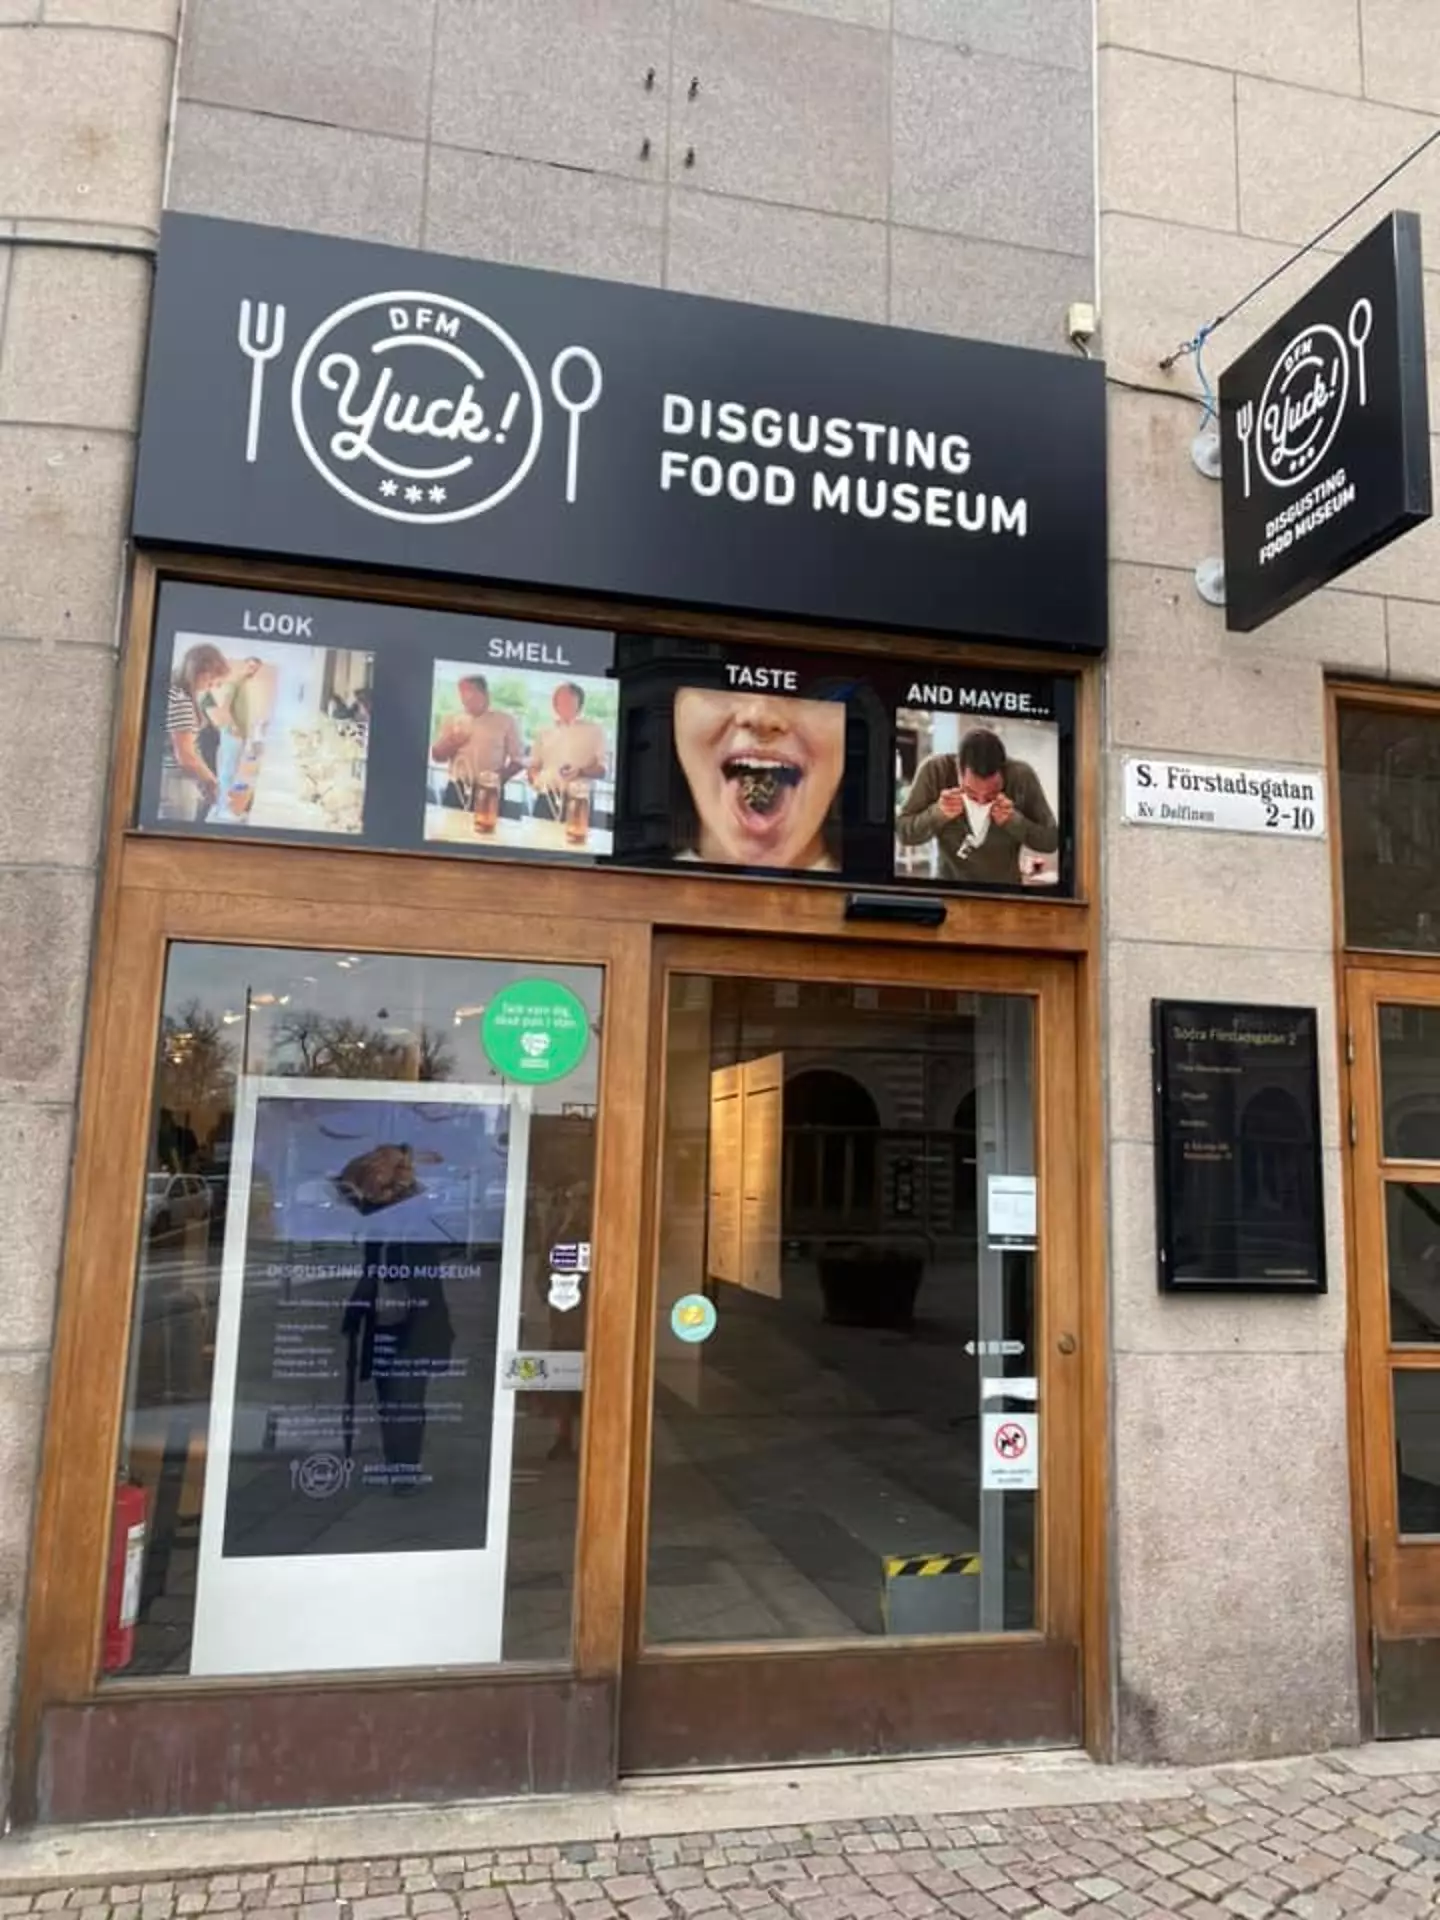 The Disgusting Food Museum, Malmo. It's worth a visit.